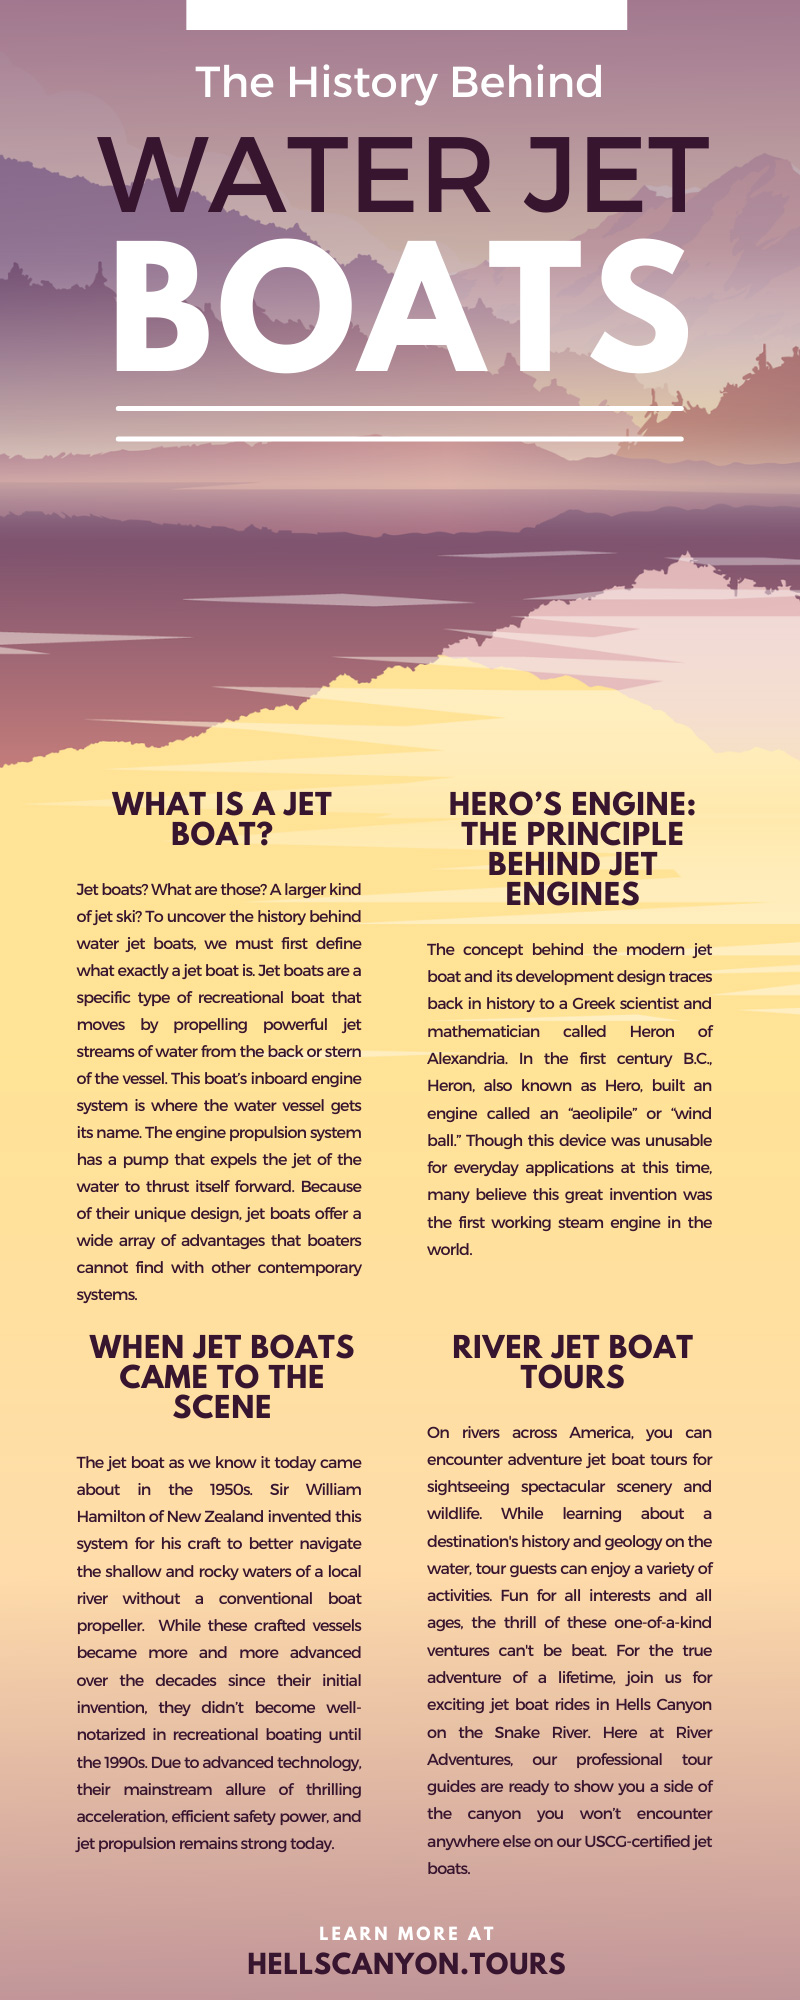 The History Behind Water Jet Boats
